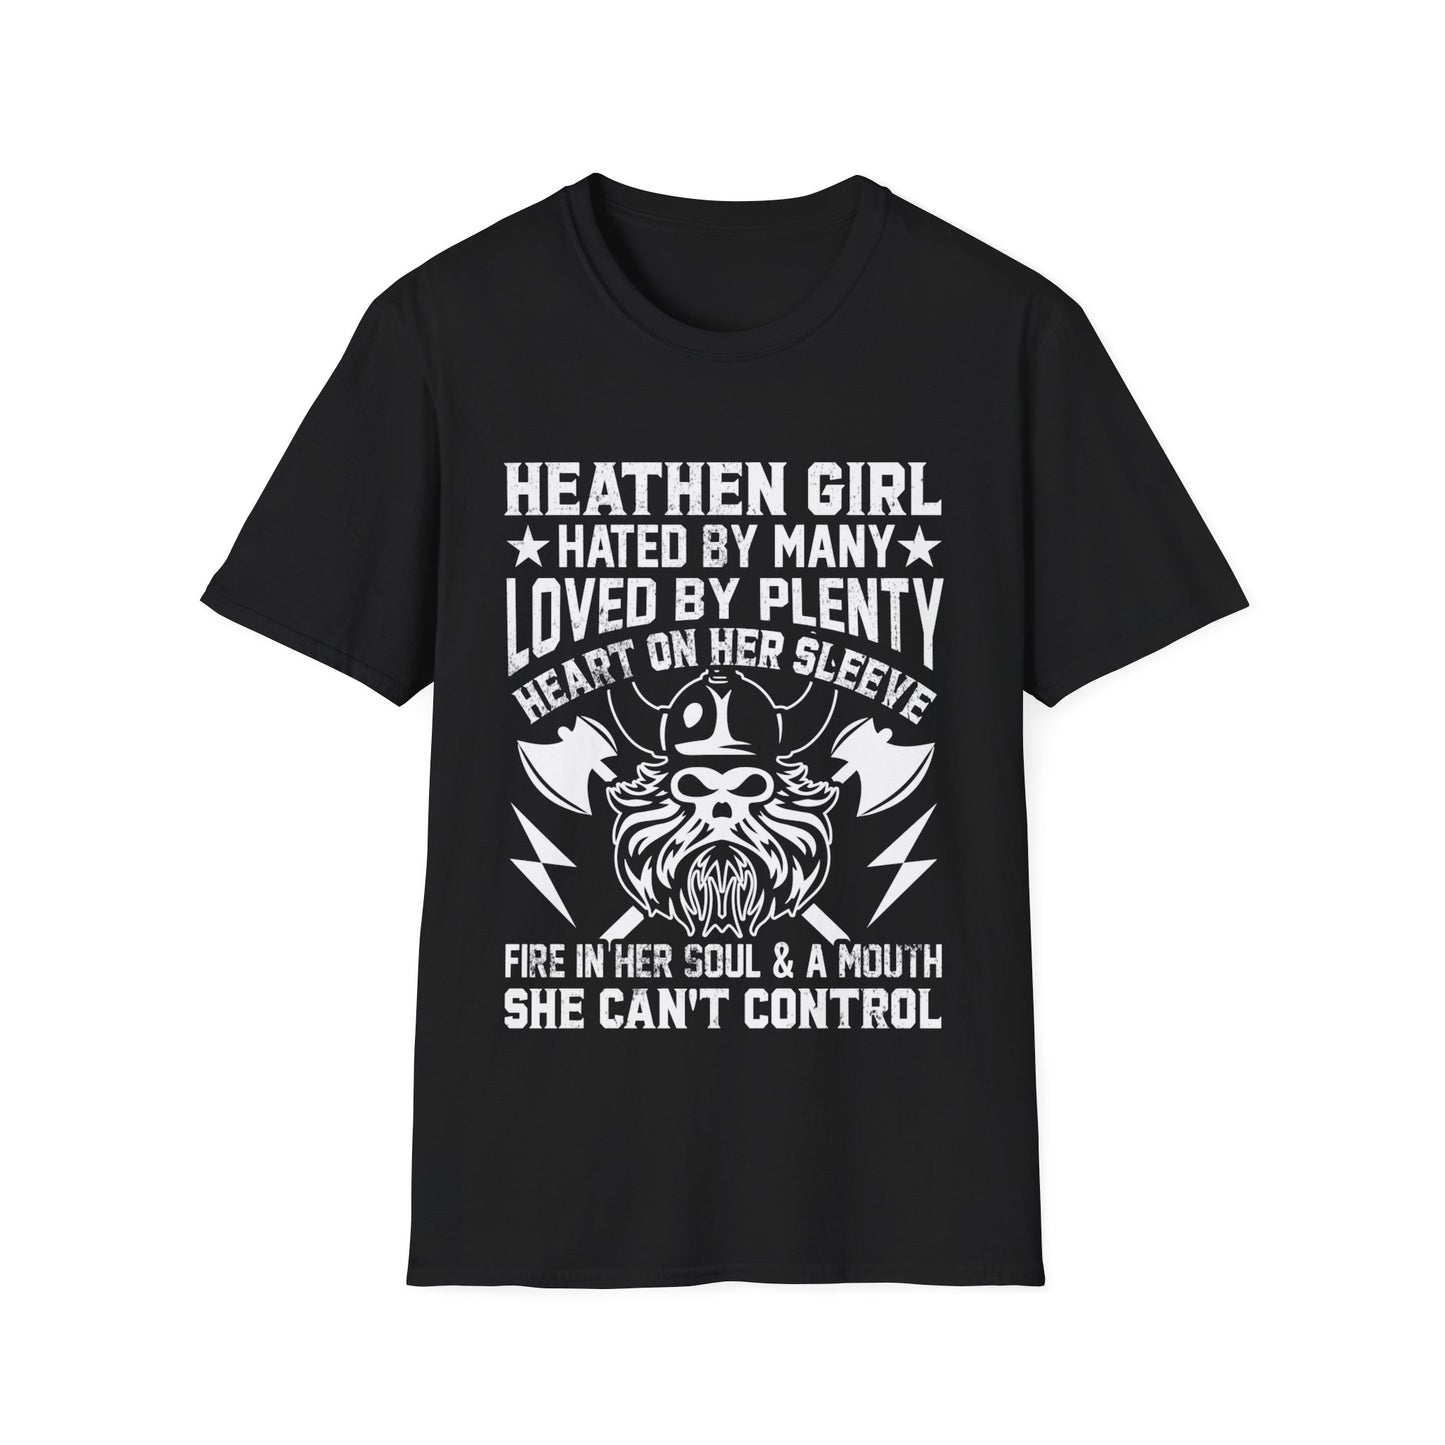 Heathen Girl- Hated By Many Loved By Plenty Heart On Her Sleeve Fire In Her Soul & A Mouth She Can't Control T-Shirt